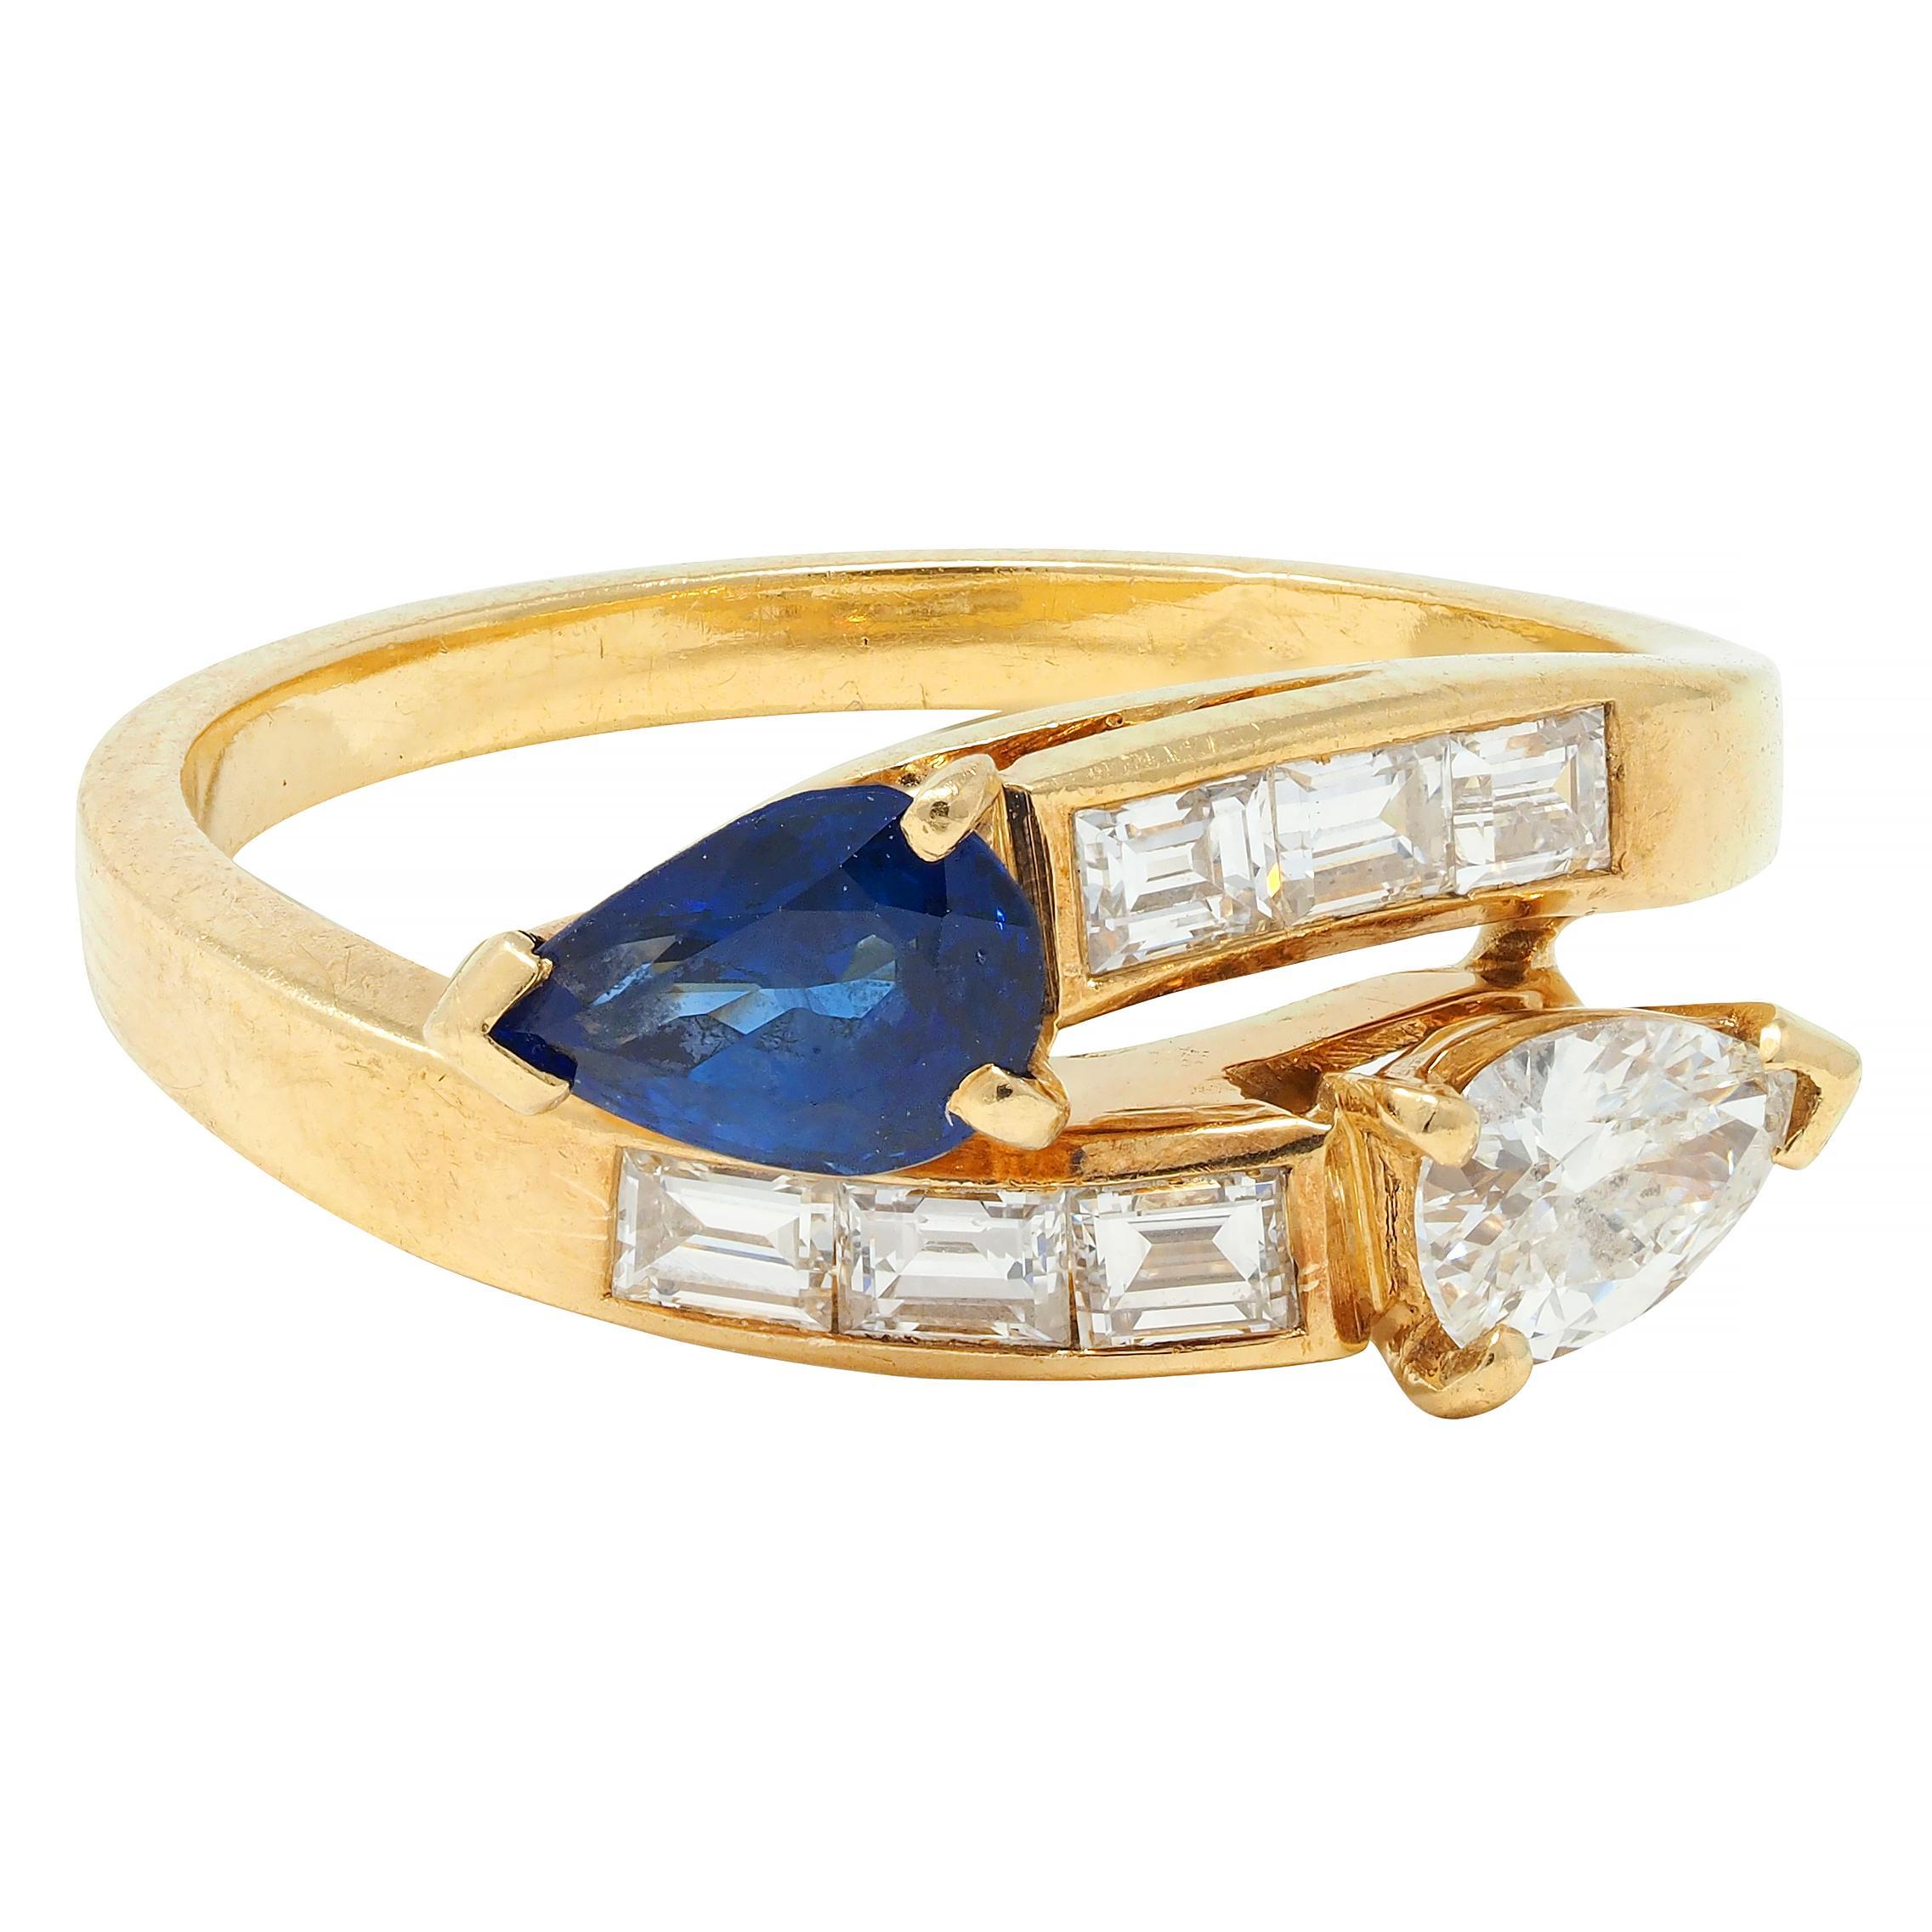 Ring is designed as a curving bypass with a prong set pear cut diamond on one end
Weighing approximately 0.26 carat total - H color with SI1 clarity
The other end terminates with a prong set pear cut sapphire
Weighing approximately 0.78 carat total